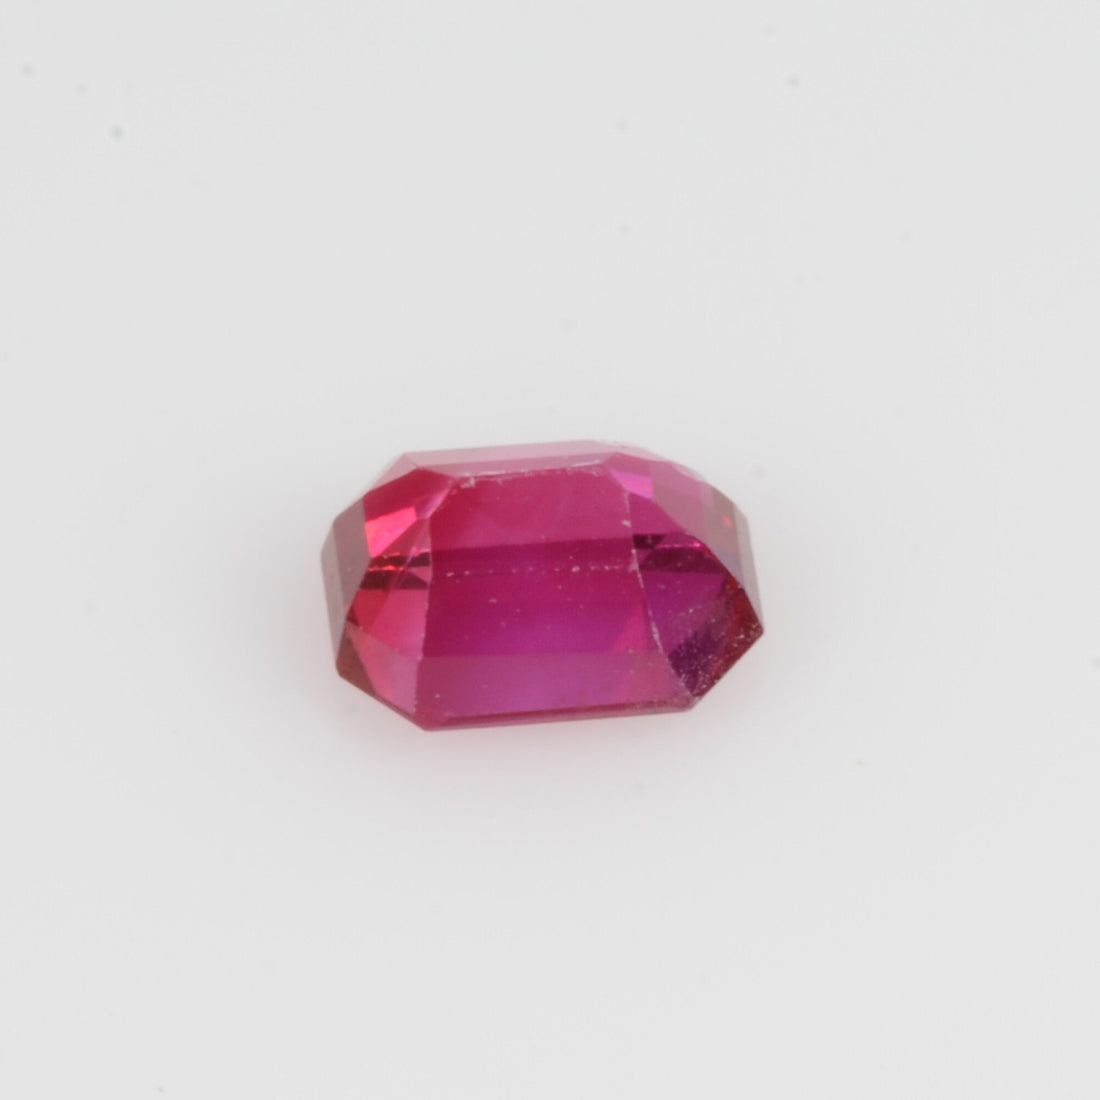 0.51 cts Natural Ruby  Loose Gemstone Octagon Cut